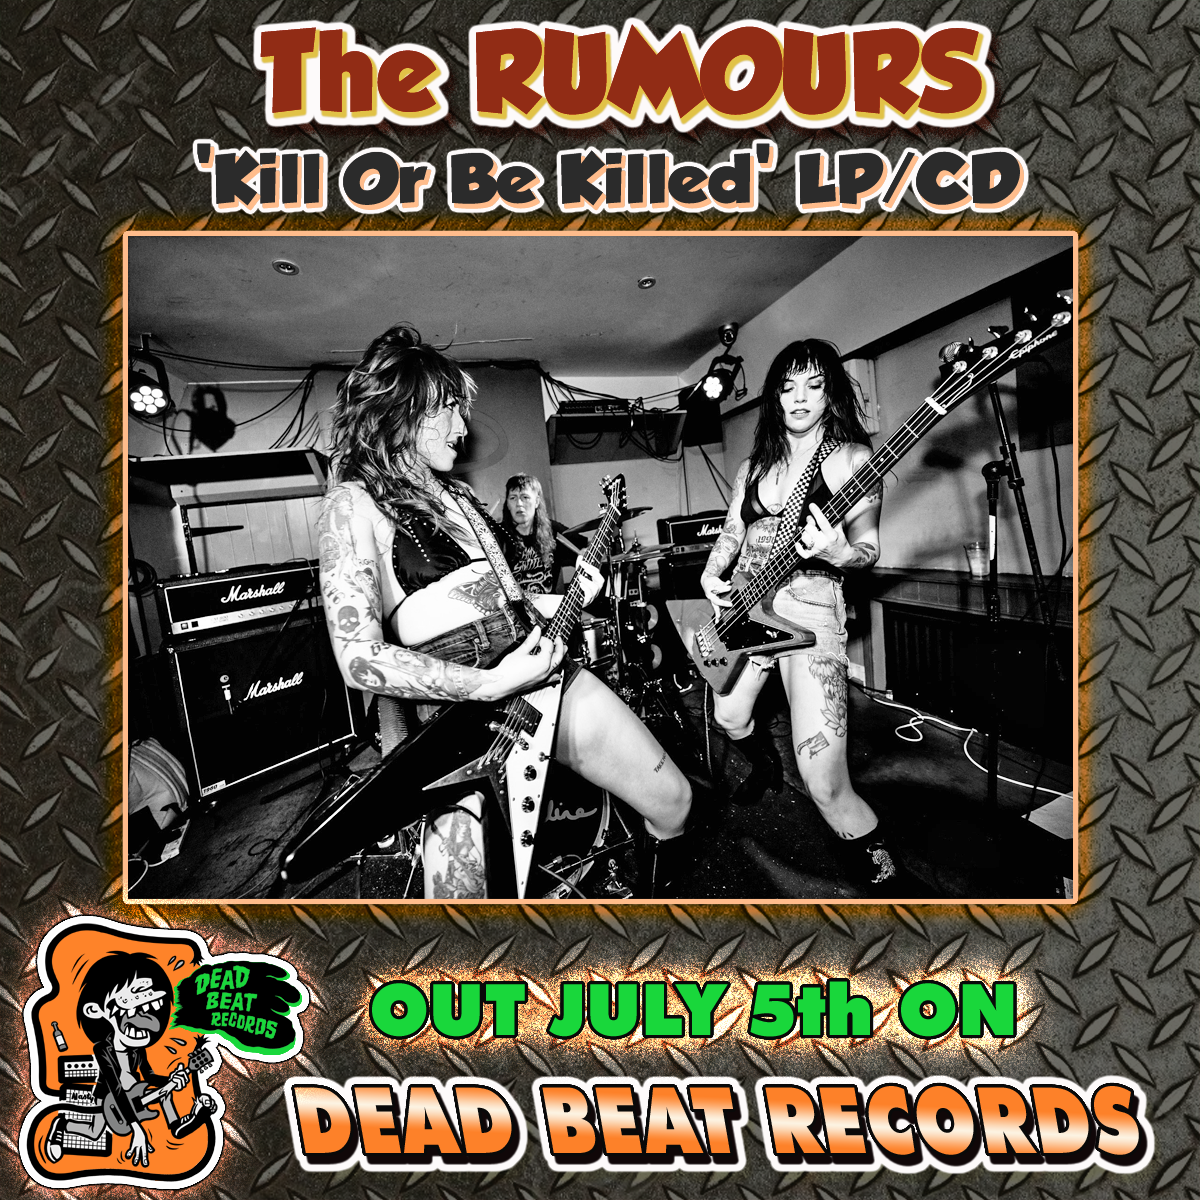 The Rumours- Kill Or Be Killed LP ~SPECIAL EDITION: METALLIC SILVER WAX LTD TO 100!